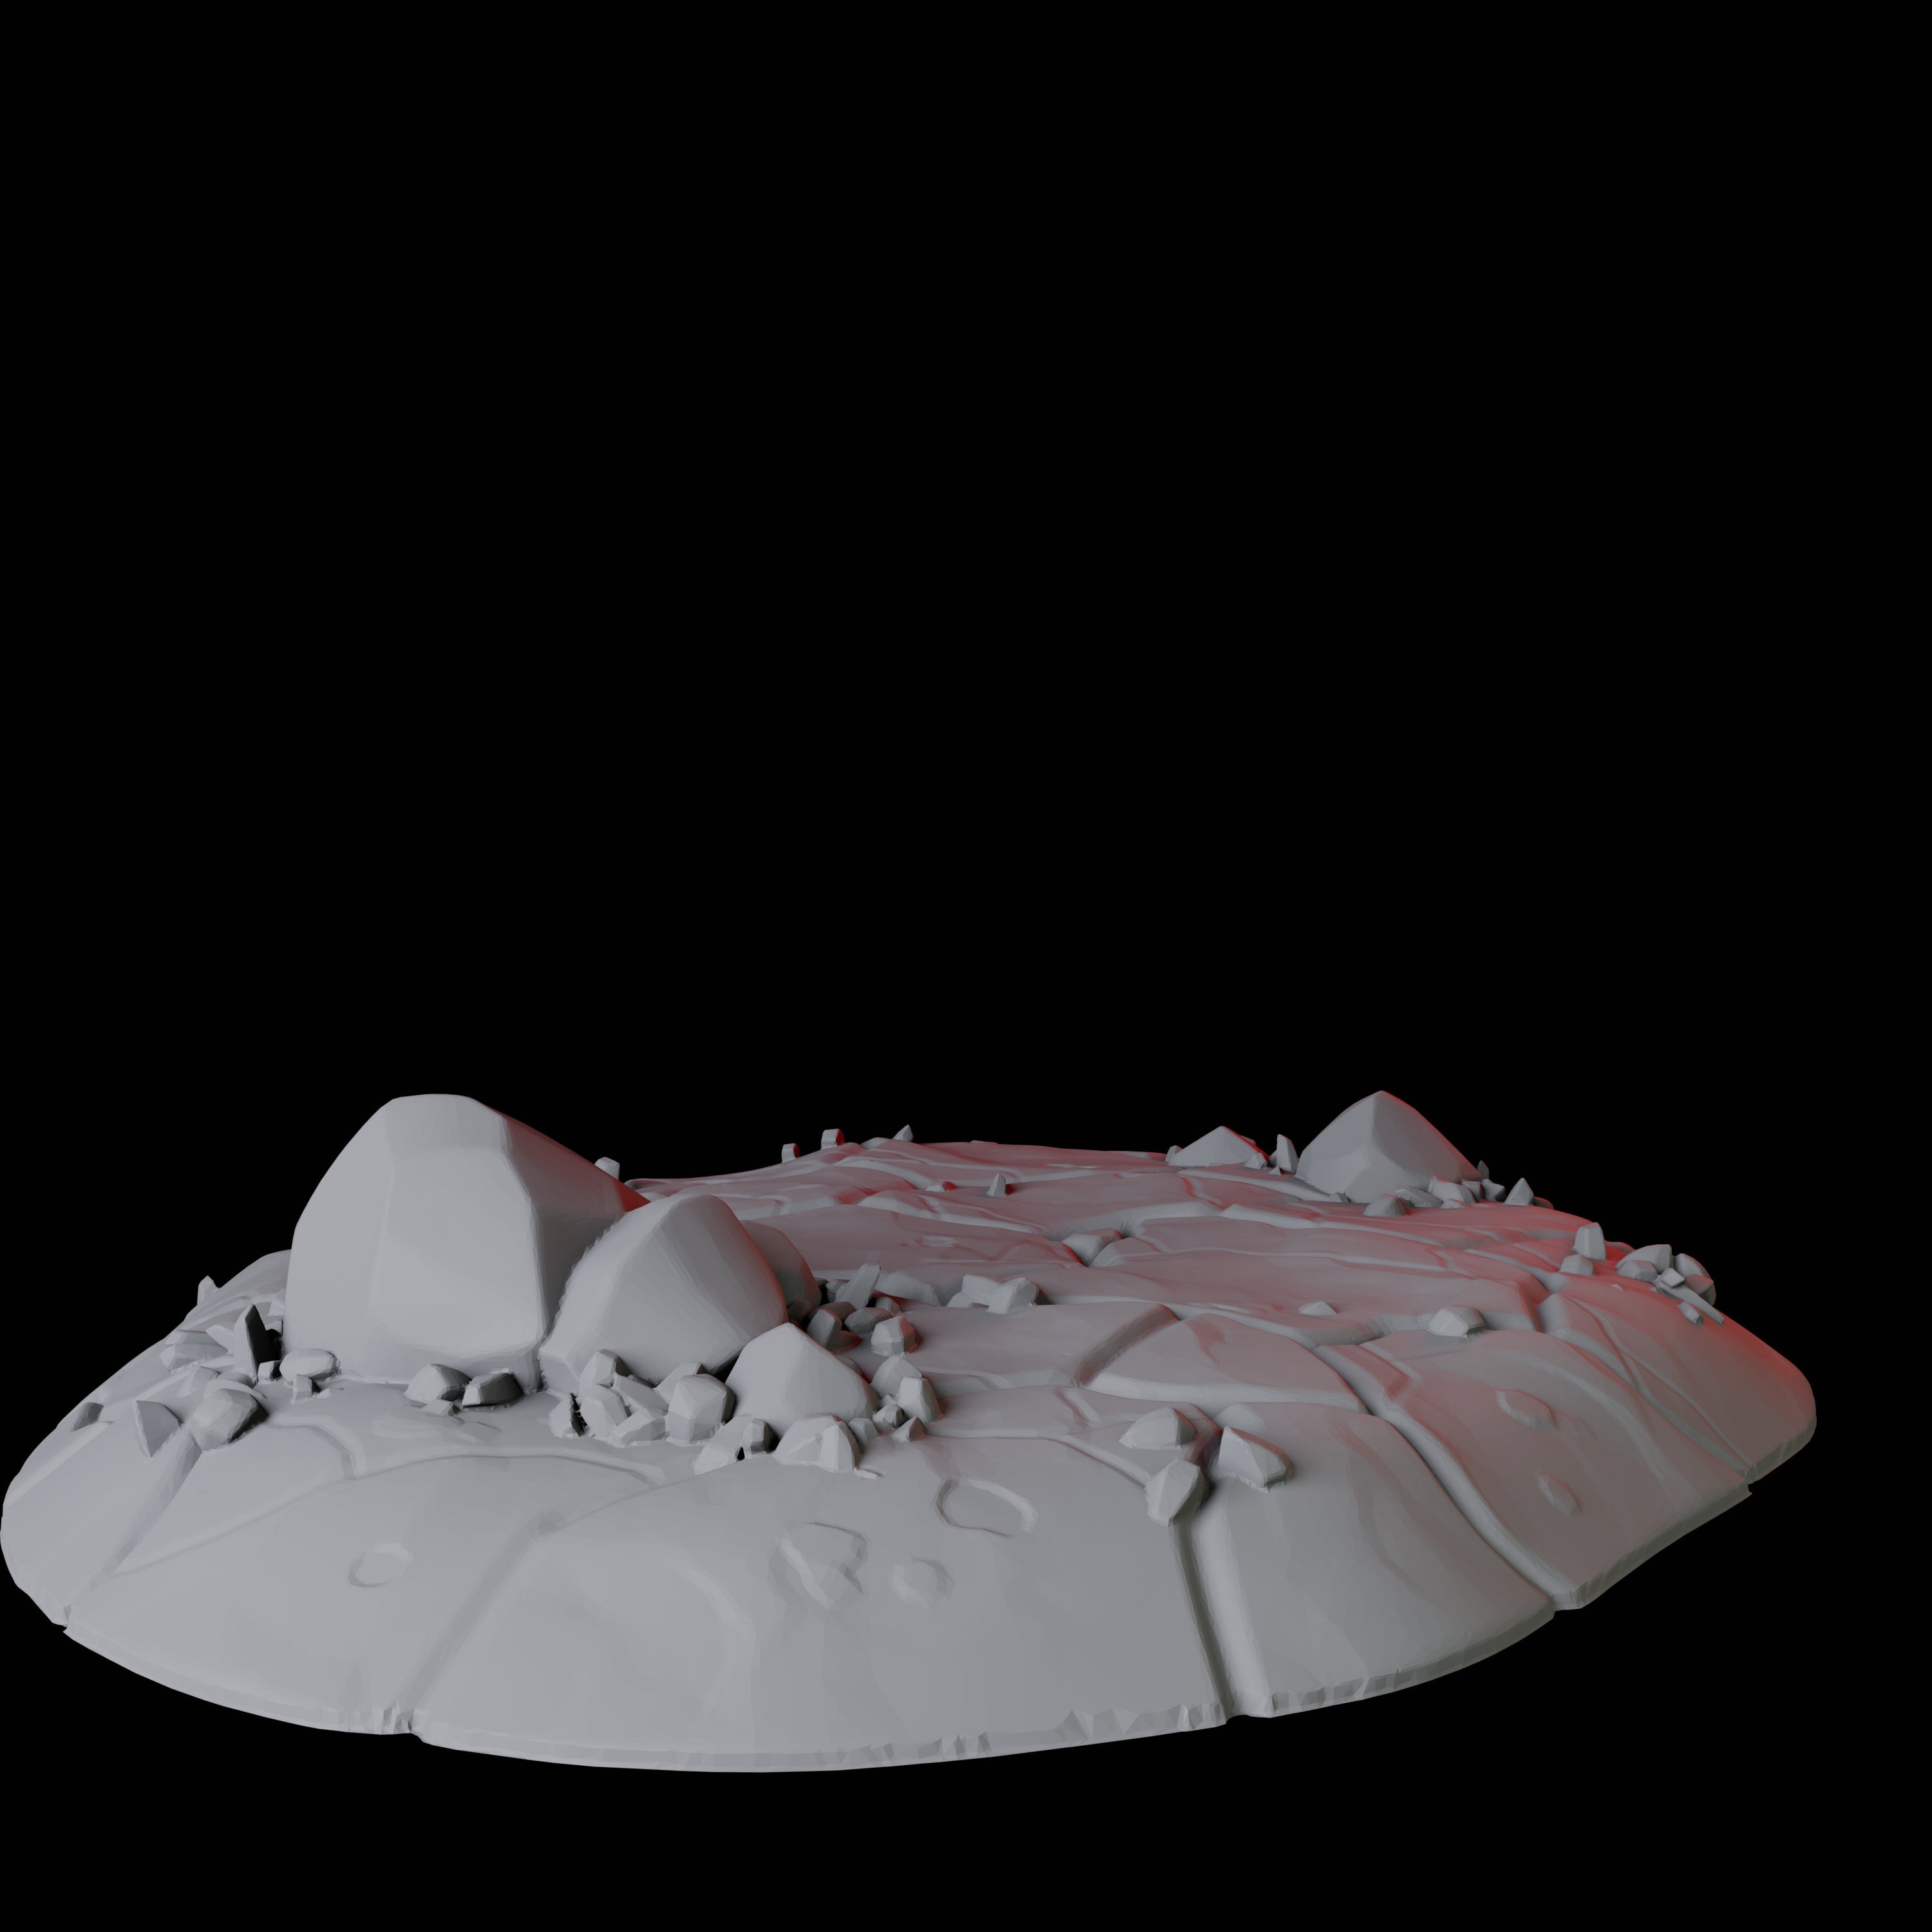 Hellscape Terrain Piece F Miniature for Dungeons and Dragons, Pathfinder or other TTRPGs